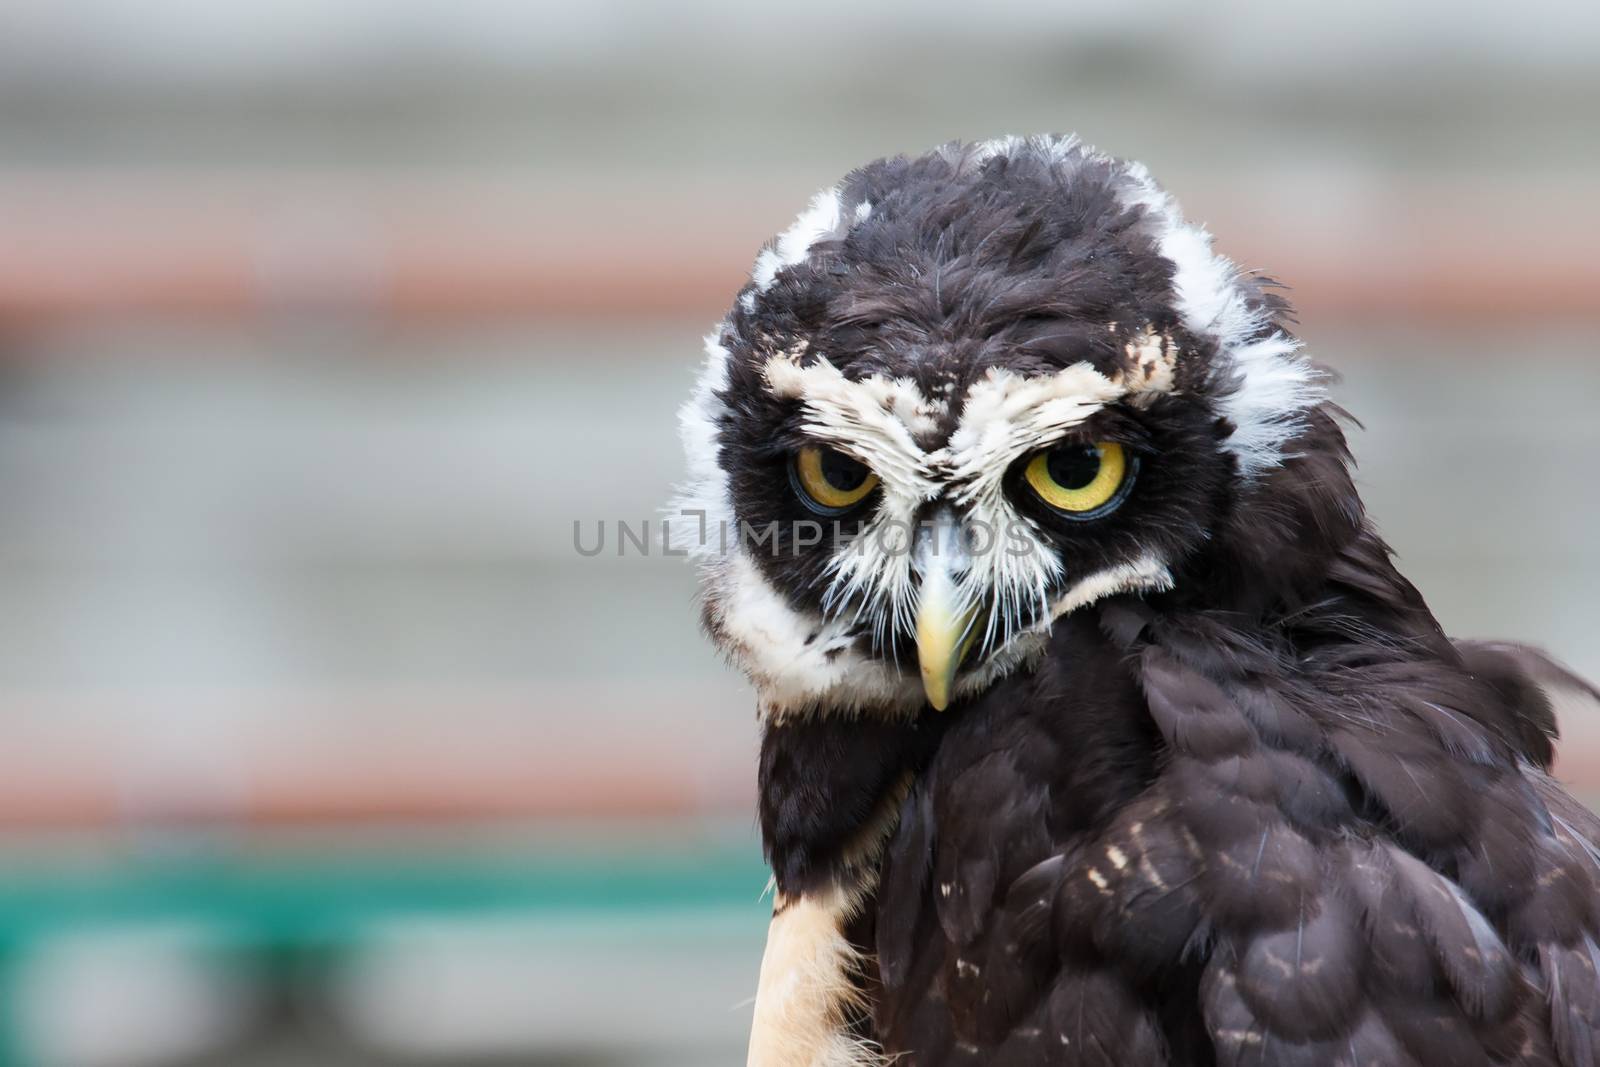 Spectacled owl by Coffee999